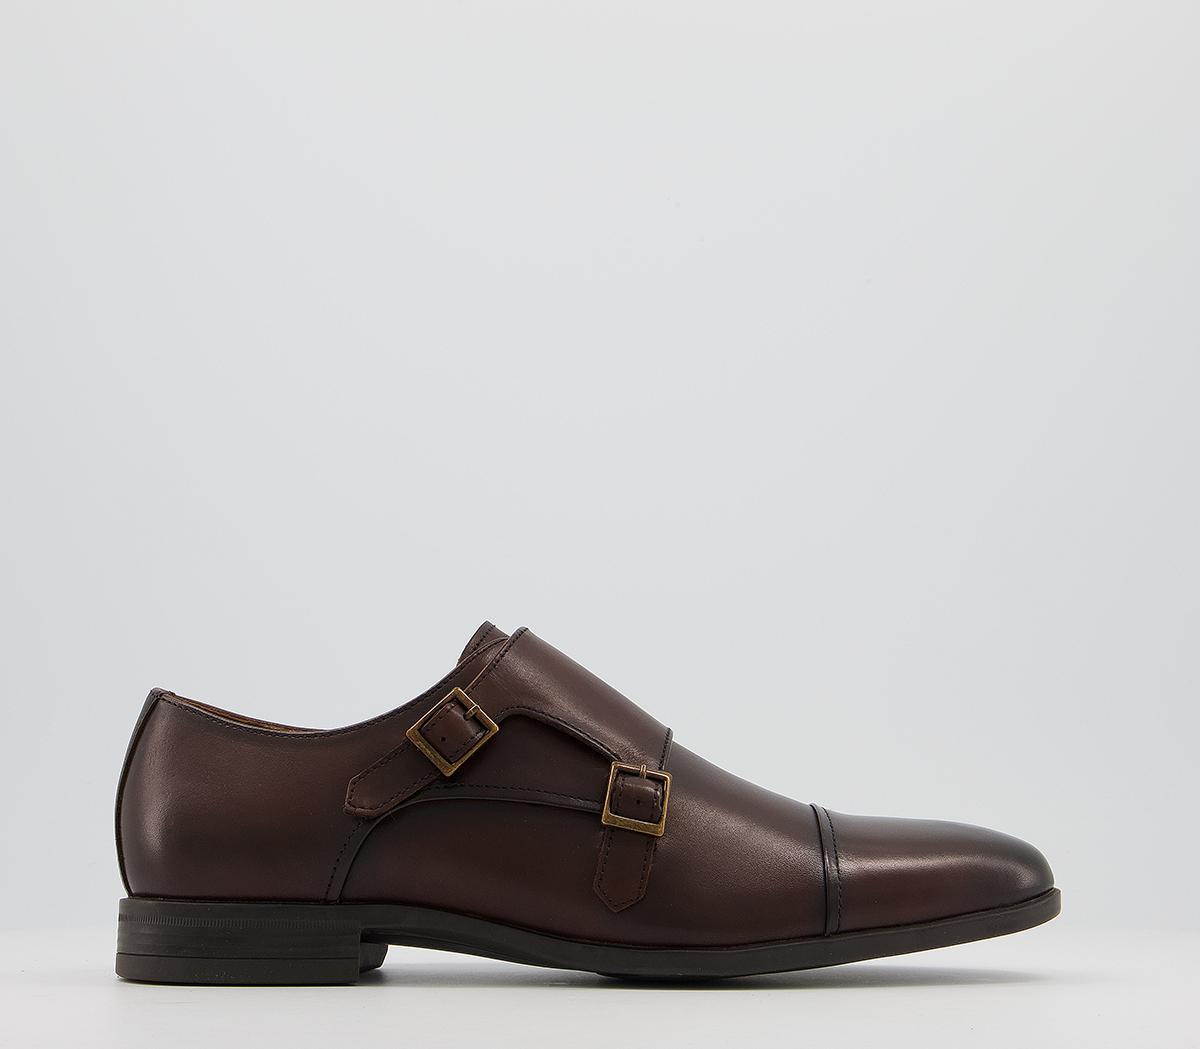 OFFICEMaddison Monk ShoesBrown Leather